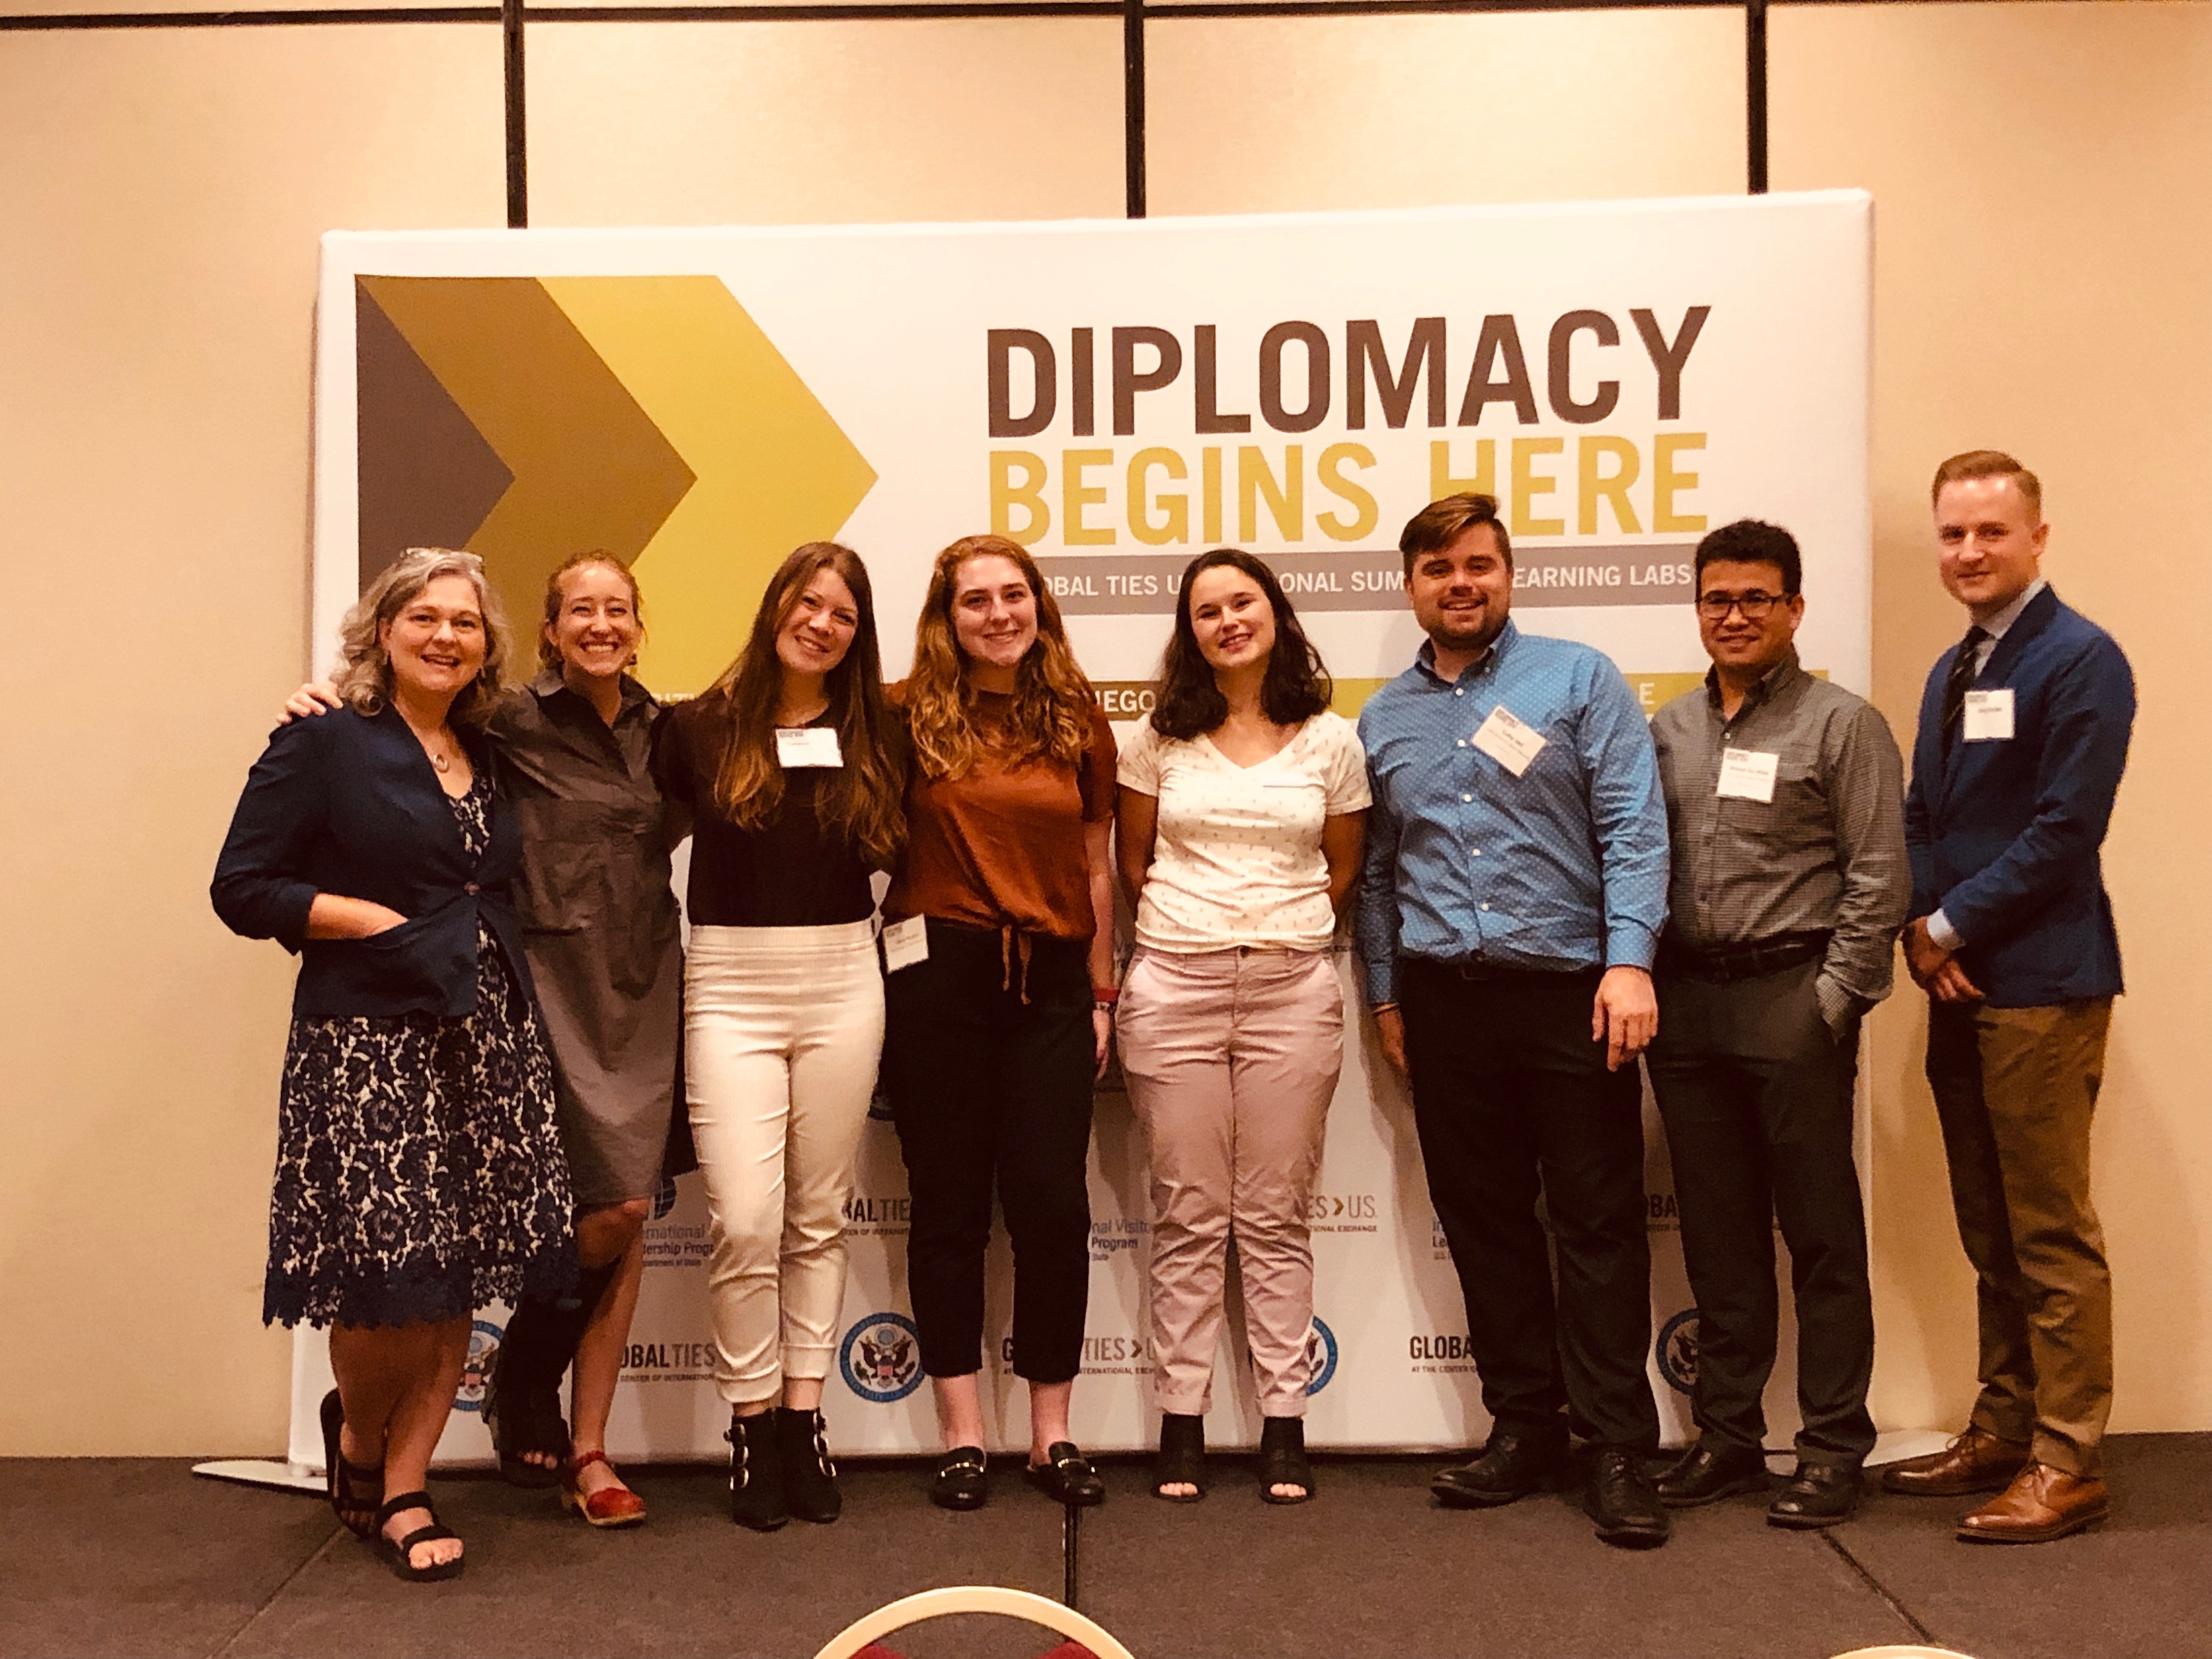 9Diplomacy-Begins-Here-Summit_Utah-Council-For-Citizen-Diplomacy_2019